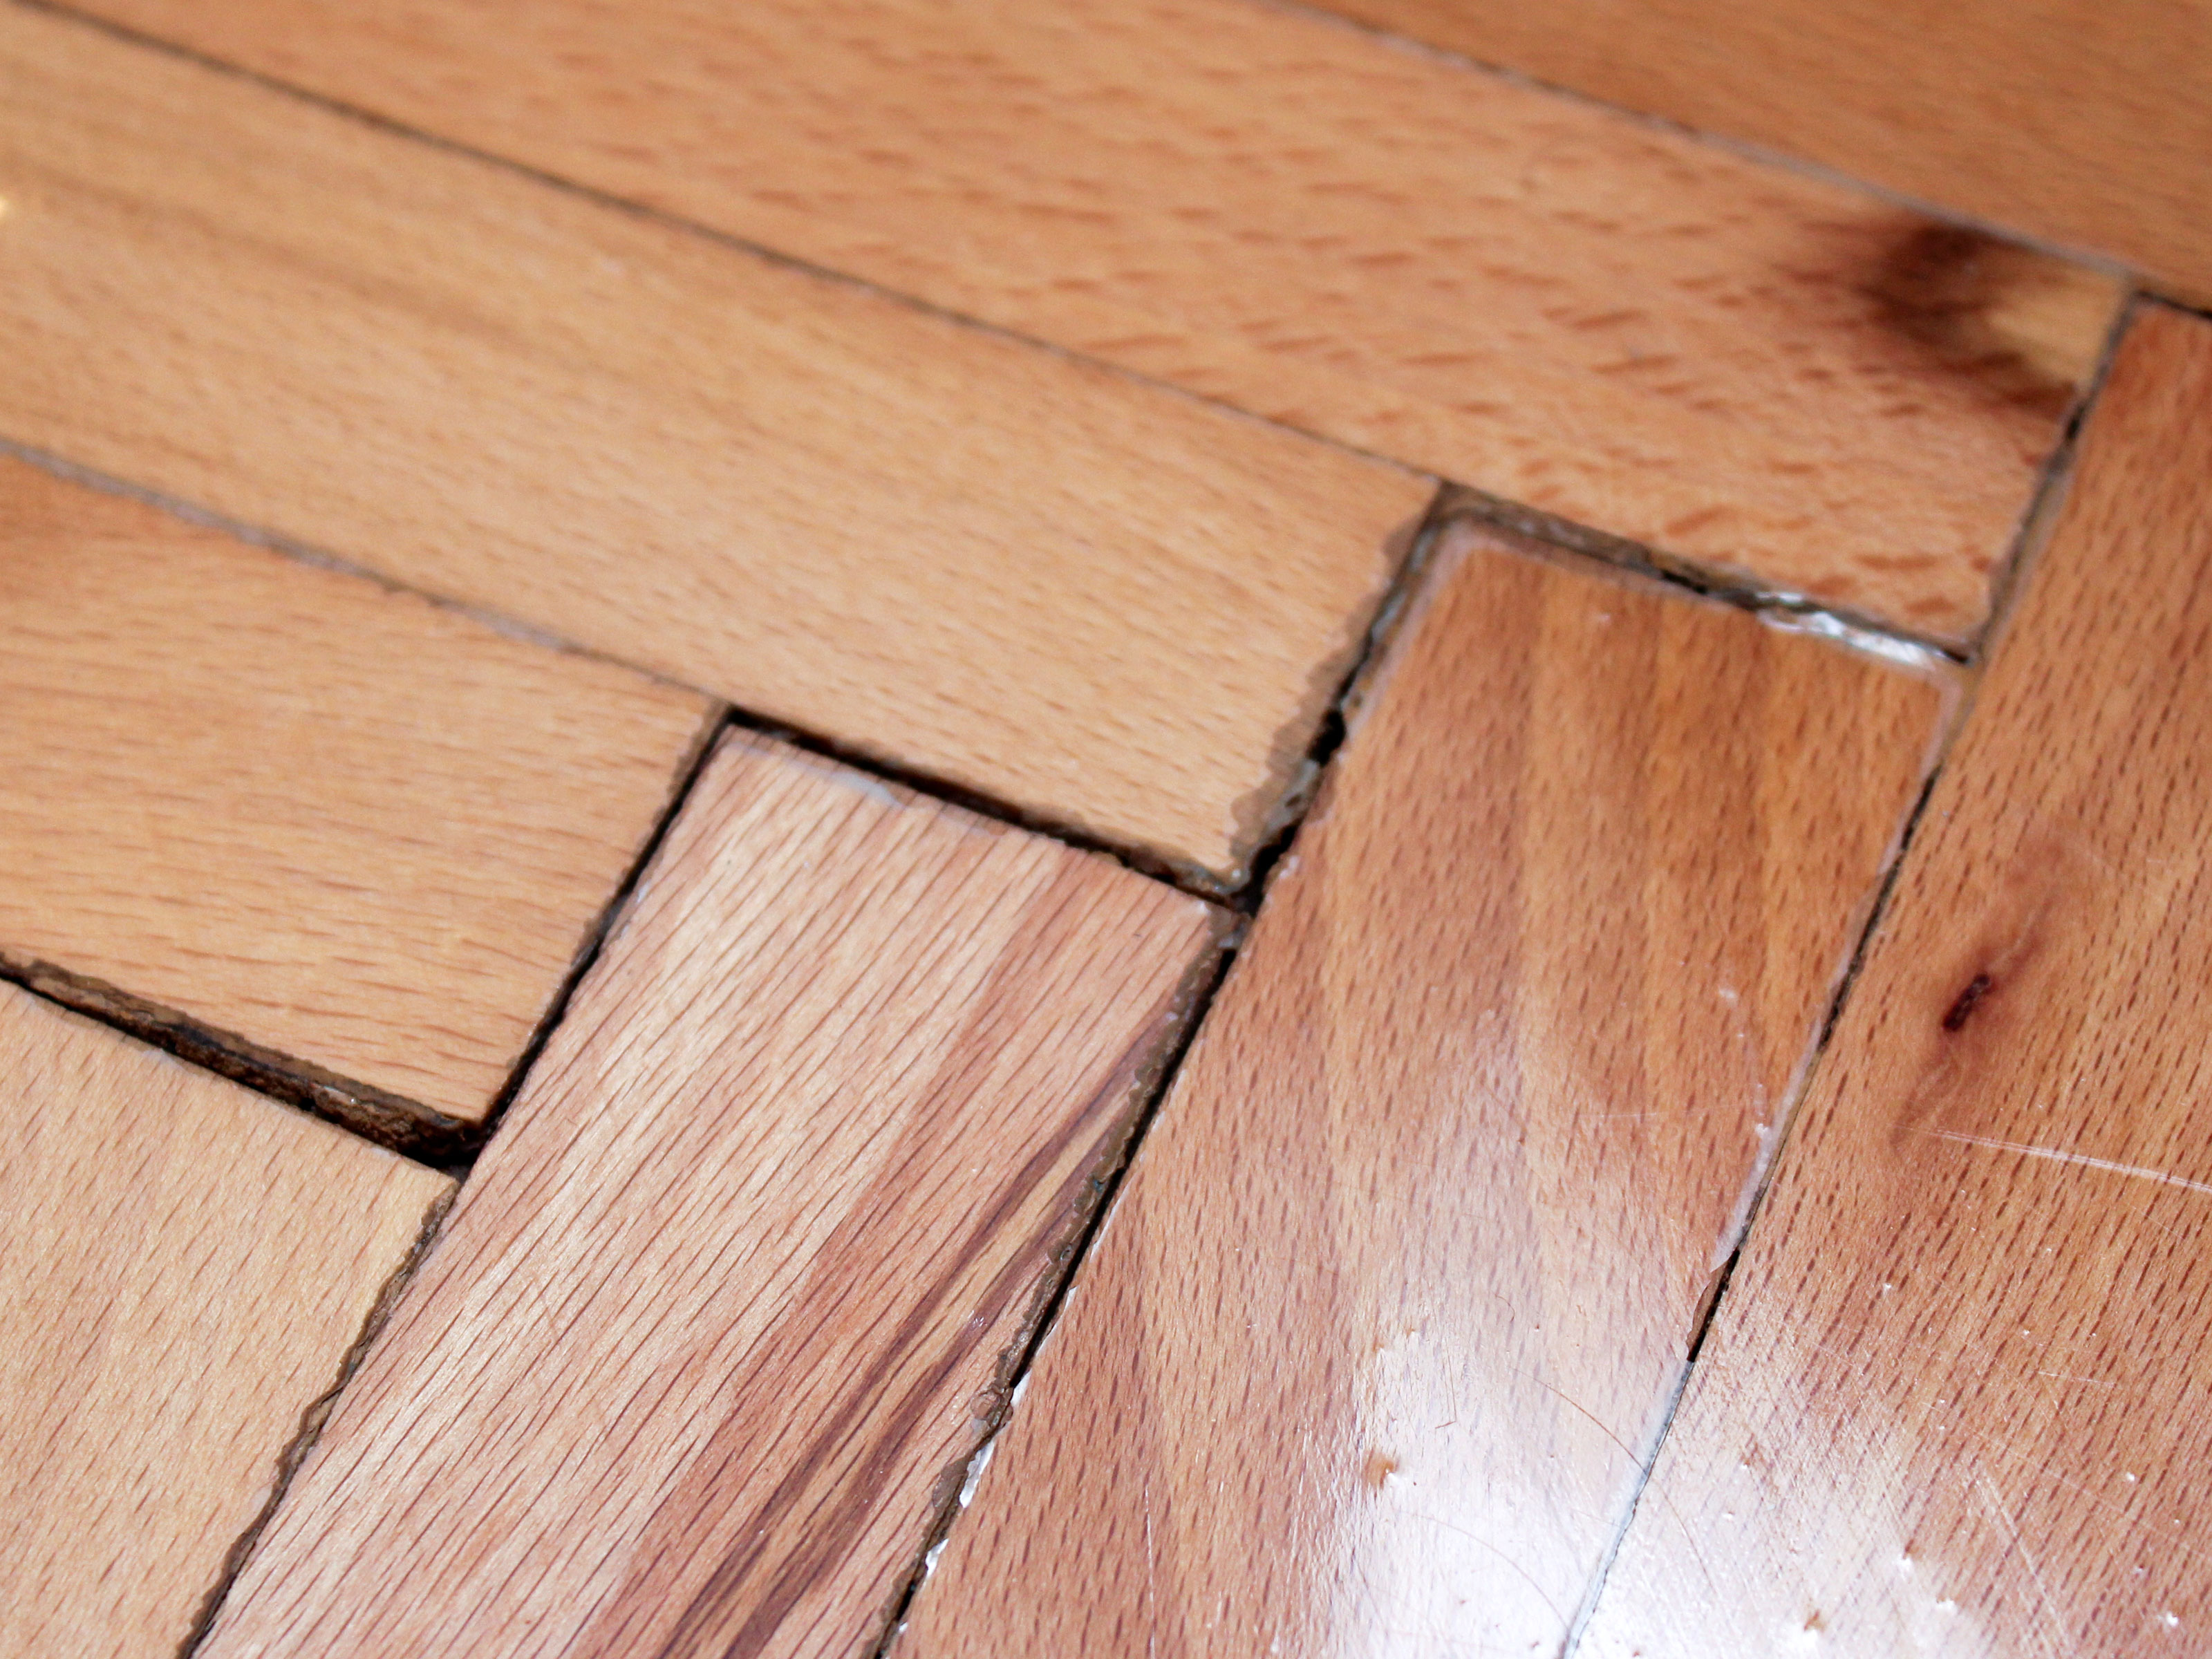 How to Repair Cracks in Wood Floors: 8 Steps (with Pictures)